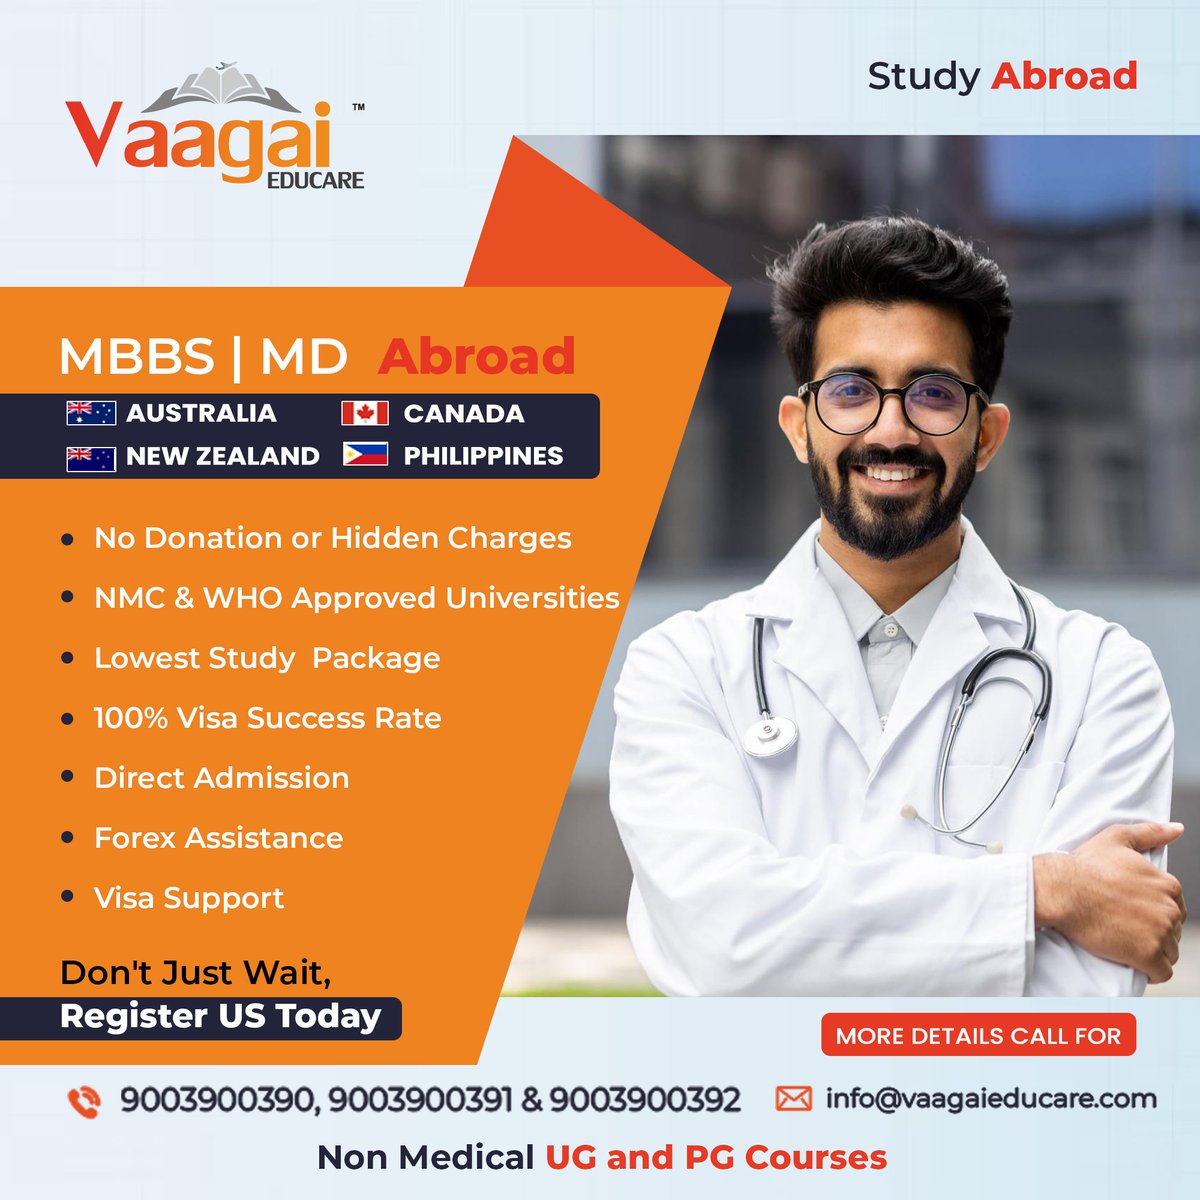 🌎 Study MBBS and MD abroad without any stress with Vaagai Educare!
🚫 No hidden fees.
🏫 NMC & WHO approved universities.
🌟 Register now and turn your dreams into reality!

☎ +91 9003900390 /+91 9003900391 / +91 9003900392
🌎 vaagaieducare.com

#mbbsabroad #VaagaiEducare